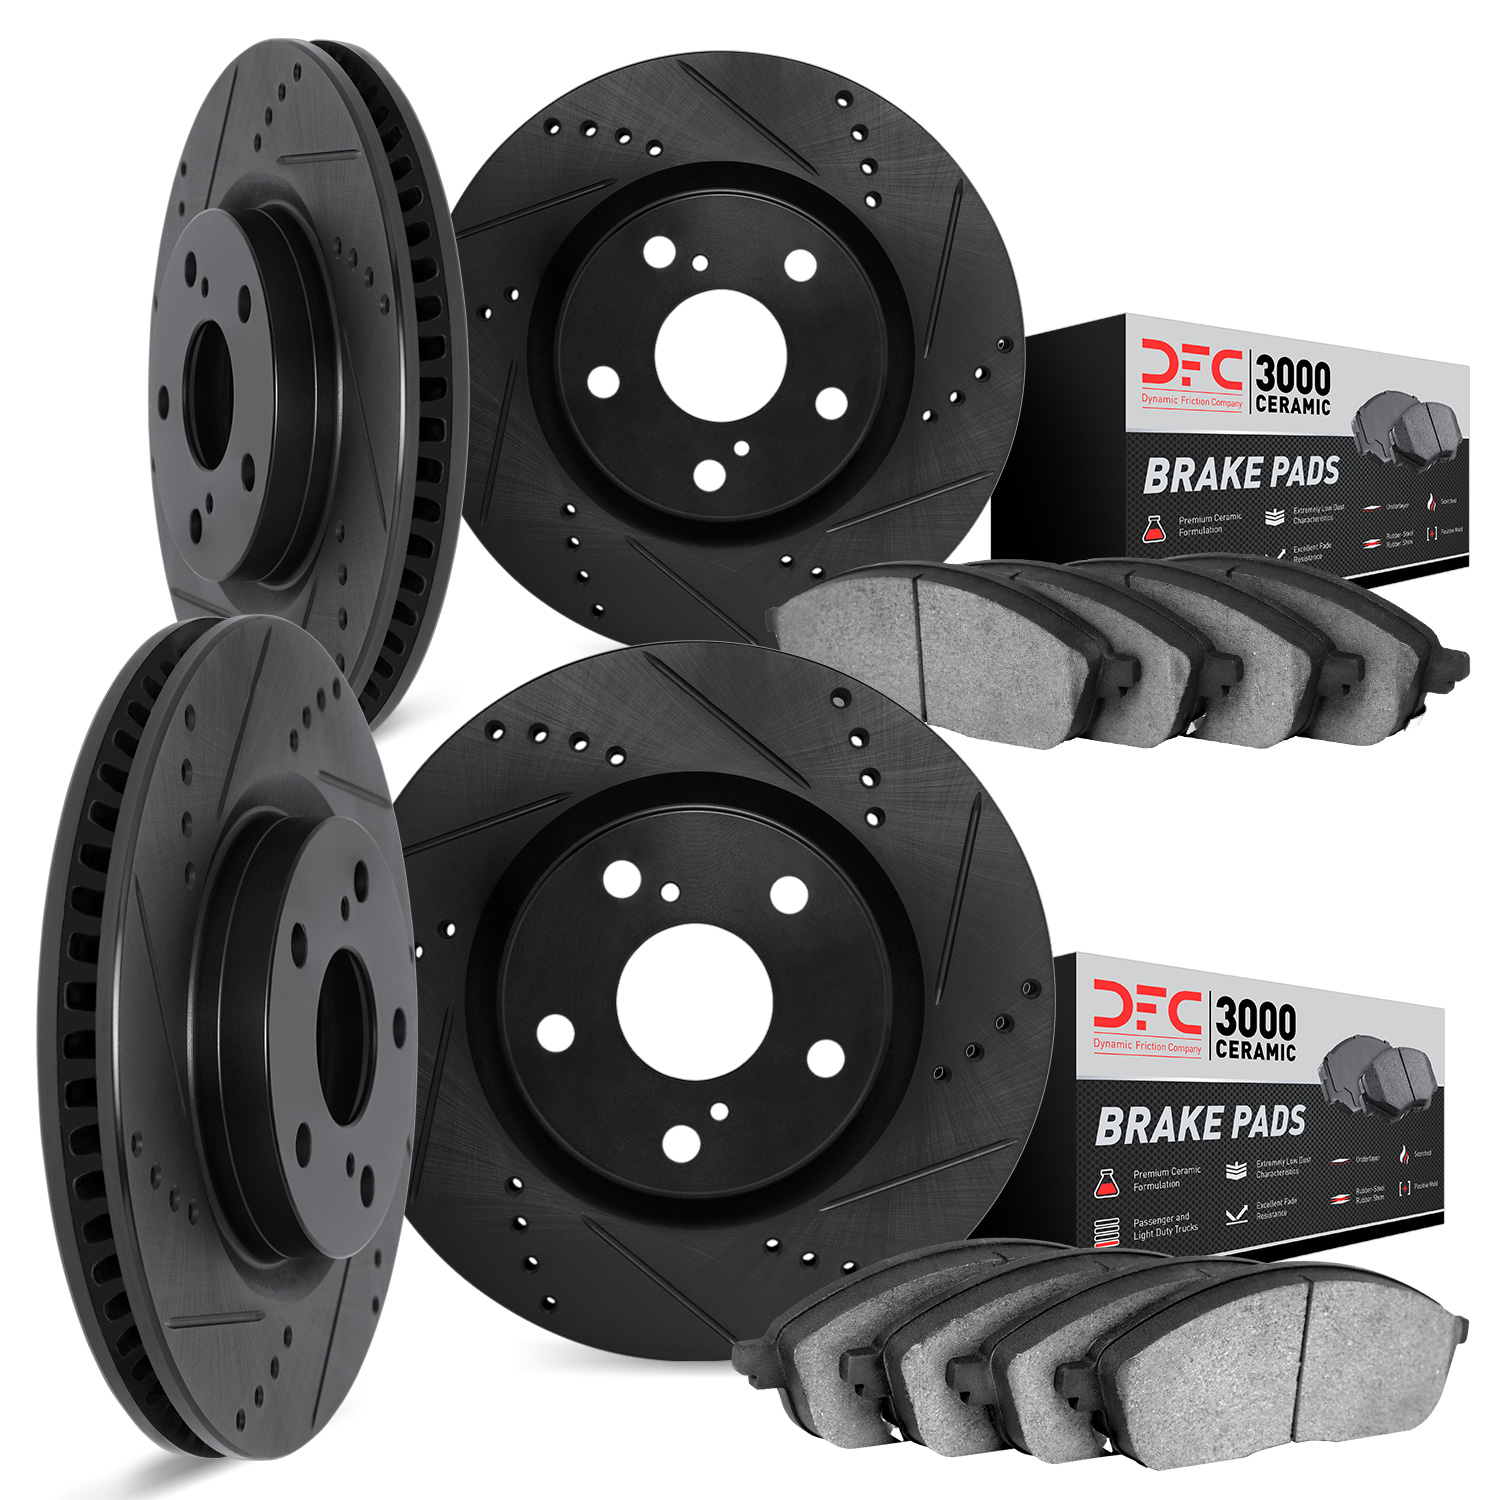 8304-27076 Drilled/Slotted Brake Rotors with 3000-Series Ceramic Brake Pads Kit [Black], 2003-2014 Volvo, Position: Front and Re